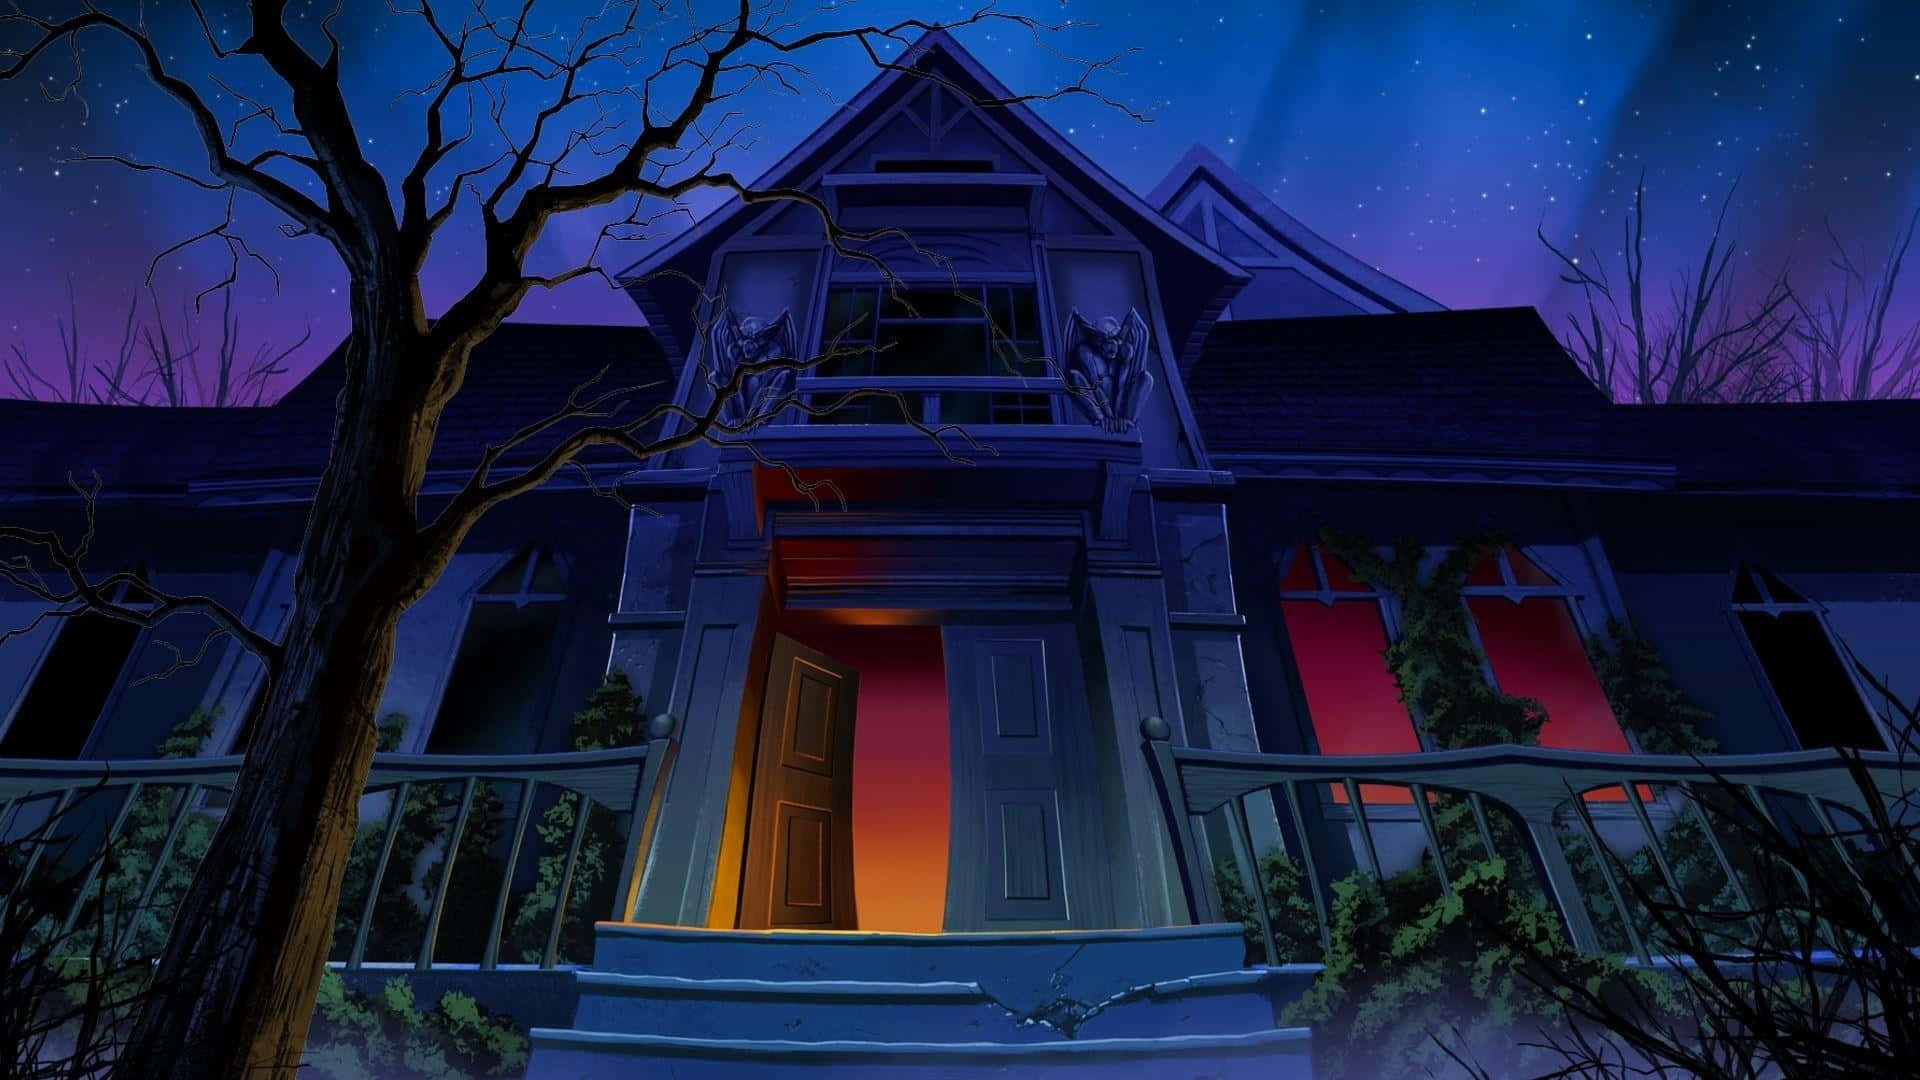 Enter the spooky world of this haunted house!